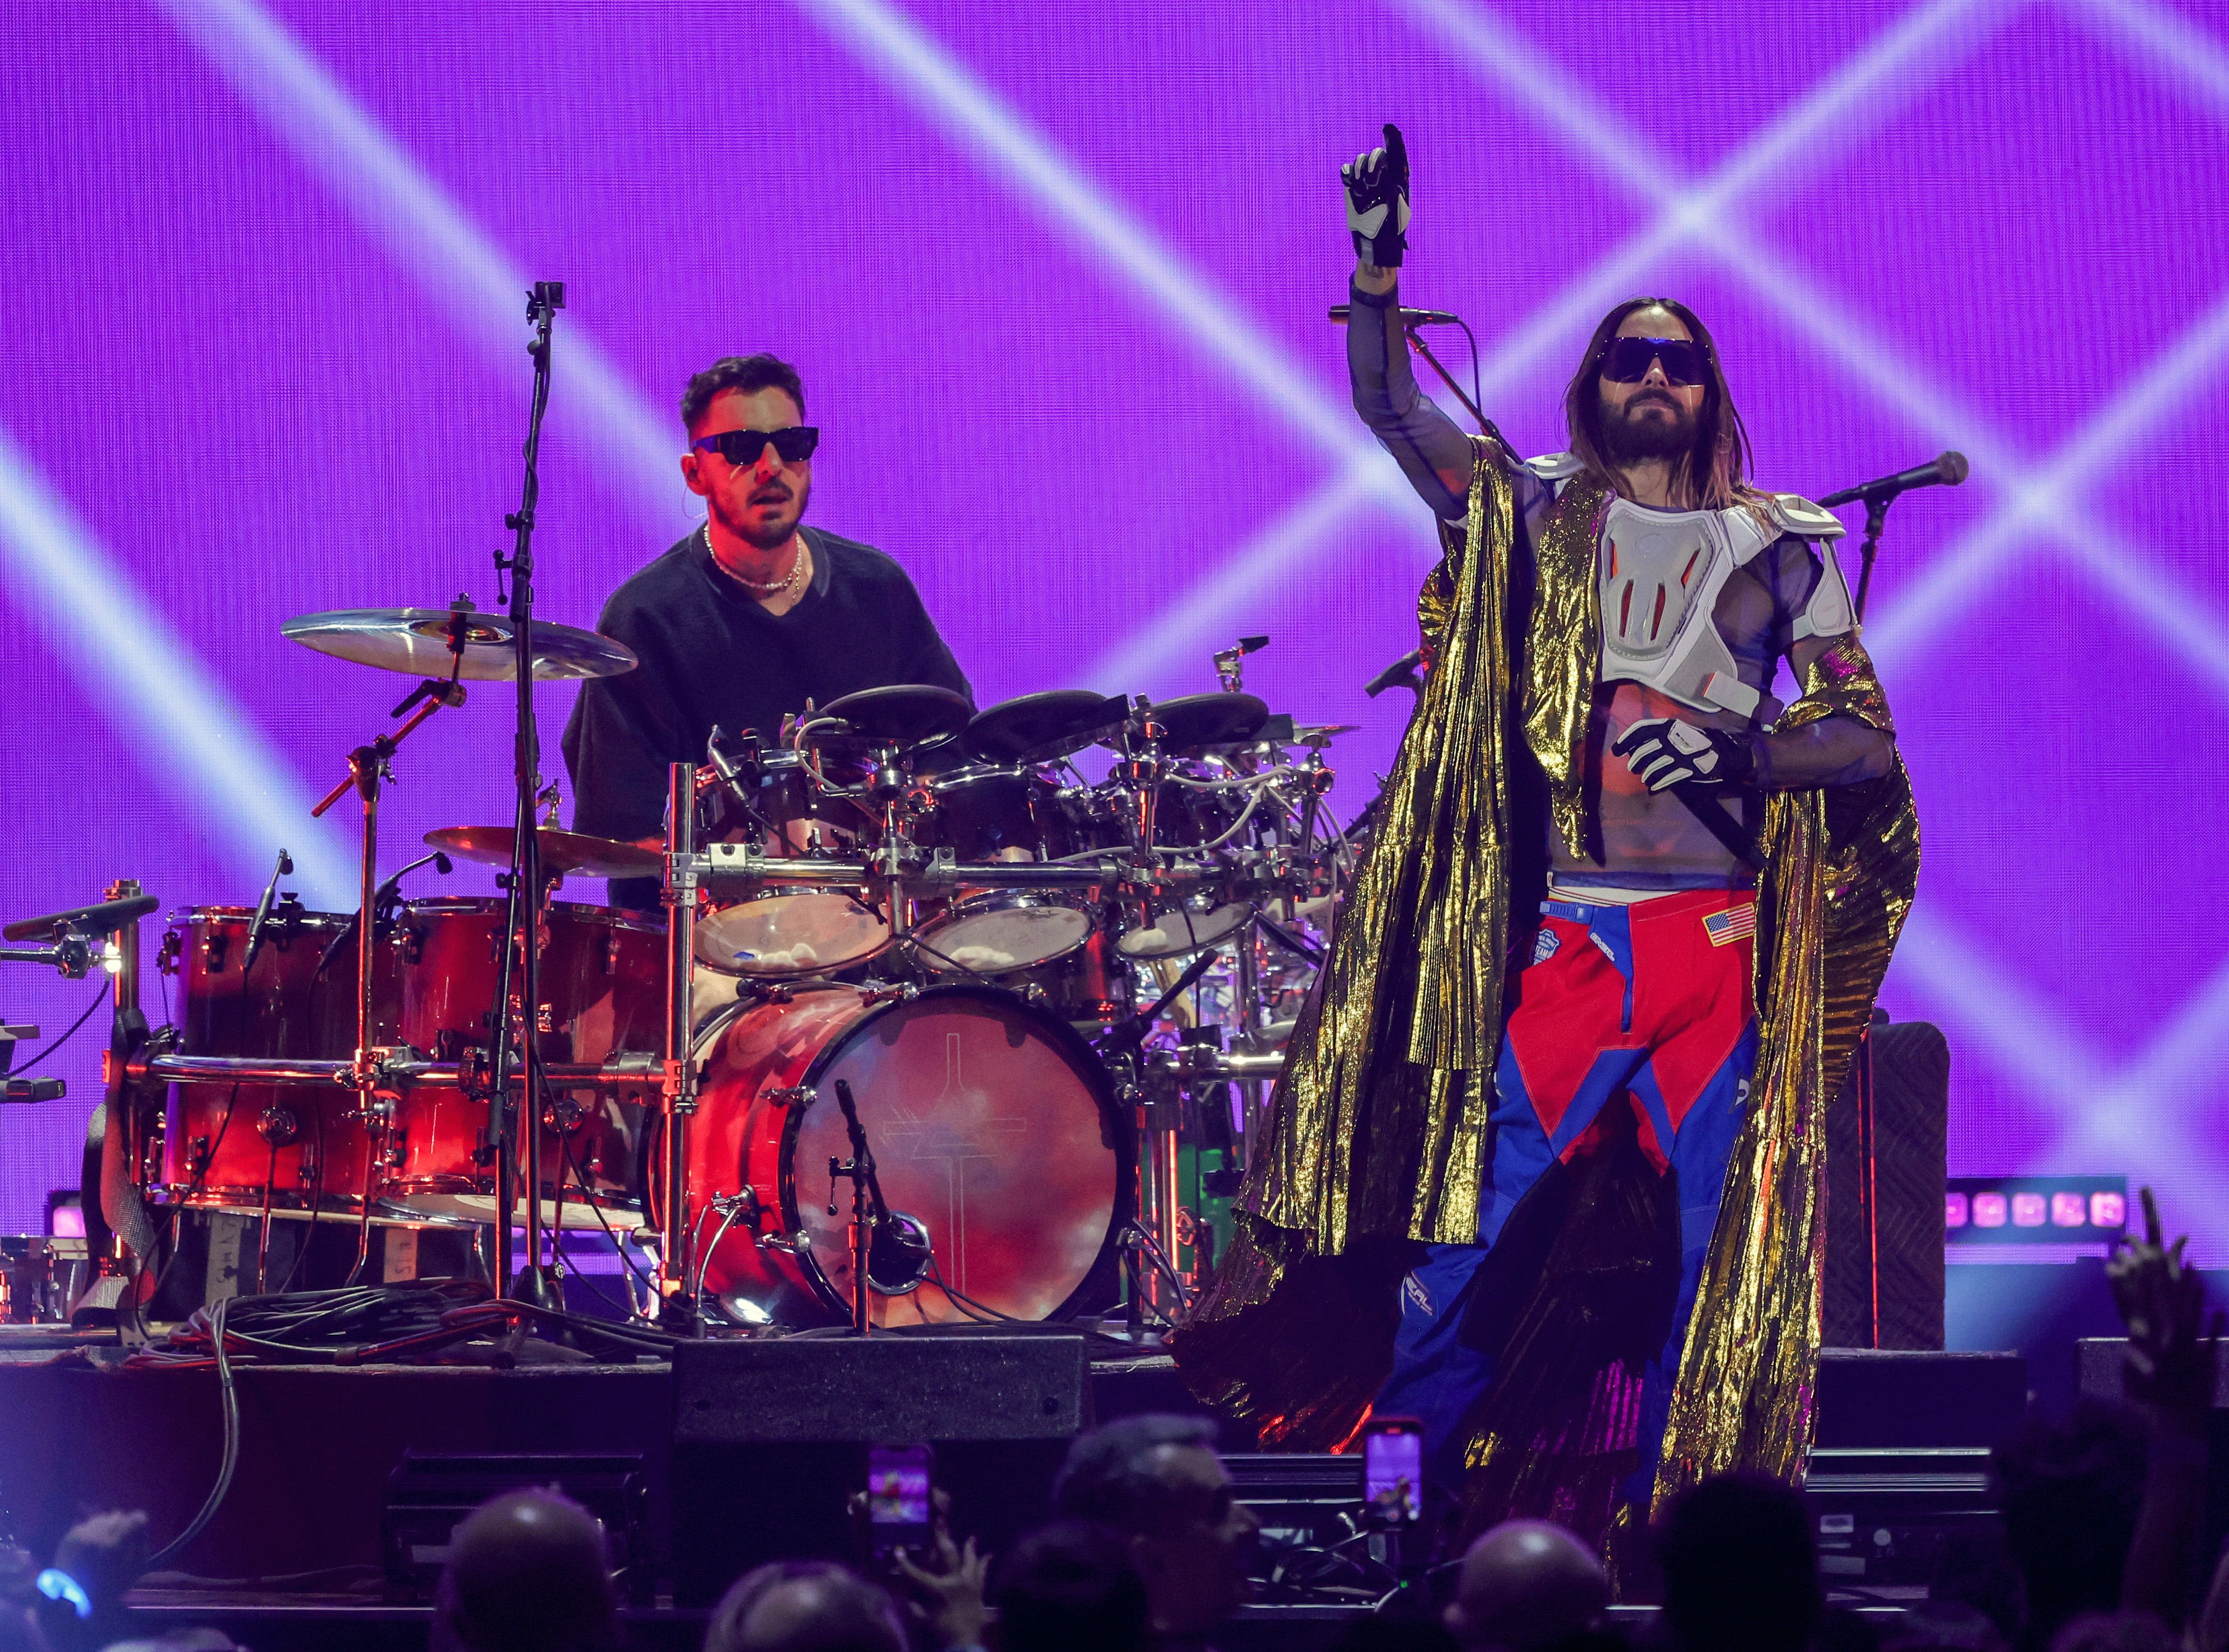 12 things to do in Des Moines this weekend include 30 Seconds to Mars, Northside Market